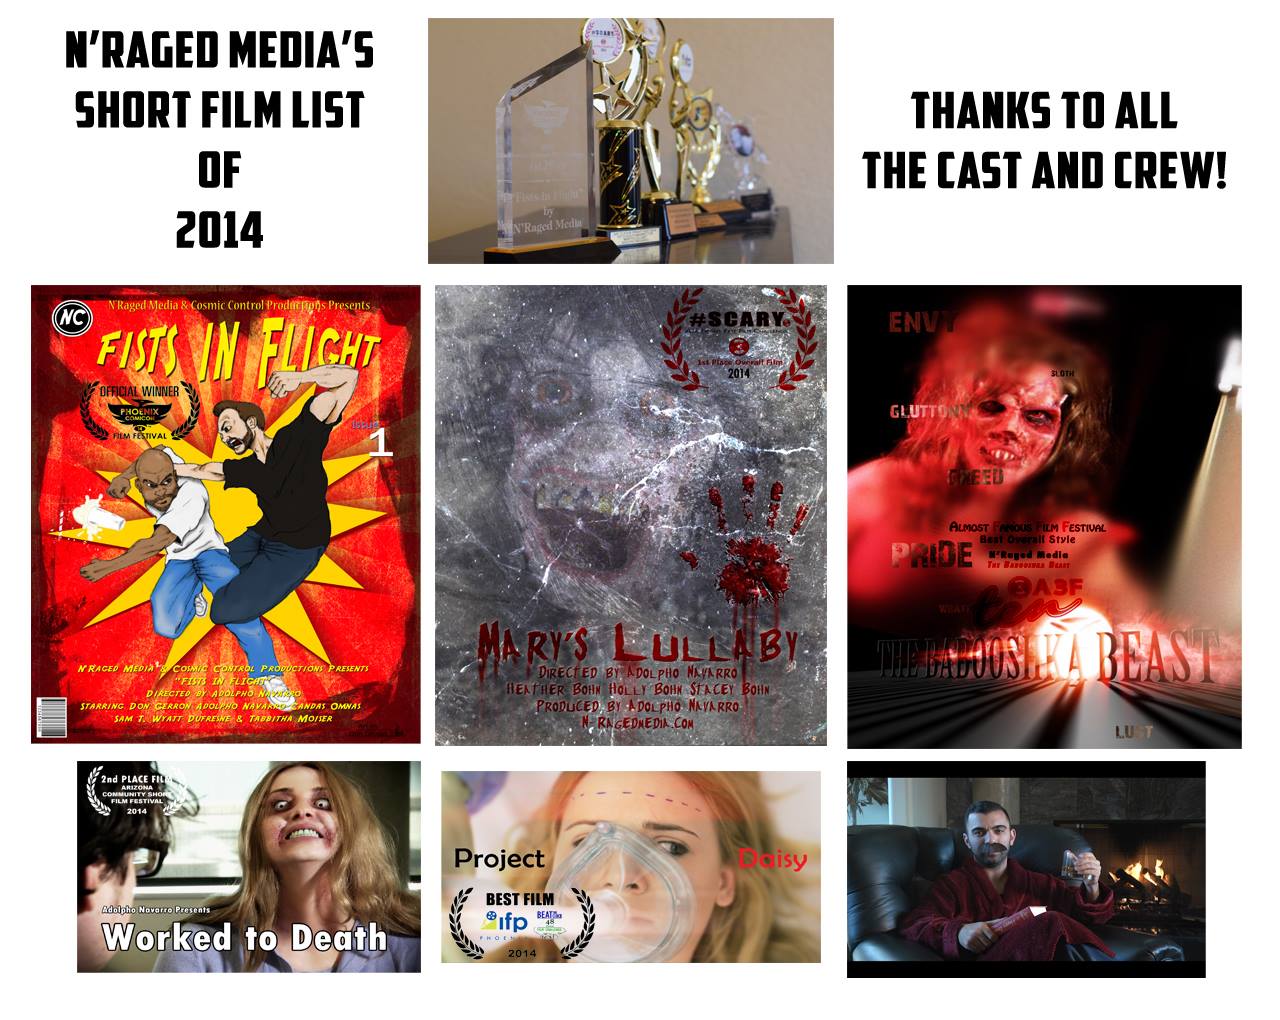 Some accomplishments in 2014 include: 1st Place Comicon Film 1st Place A3F Fright Fest 1st Place IFP Beat the Clock Challenge 2nd Place AZ Film Community 48 Hour festival